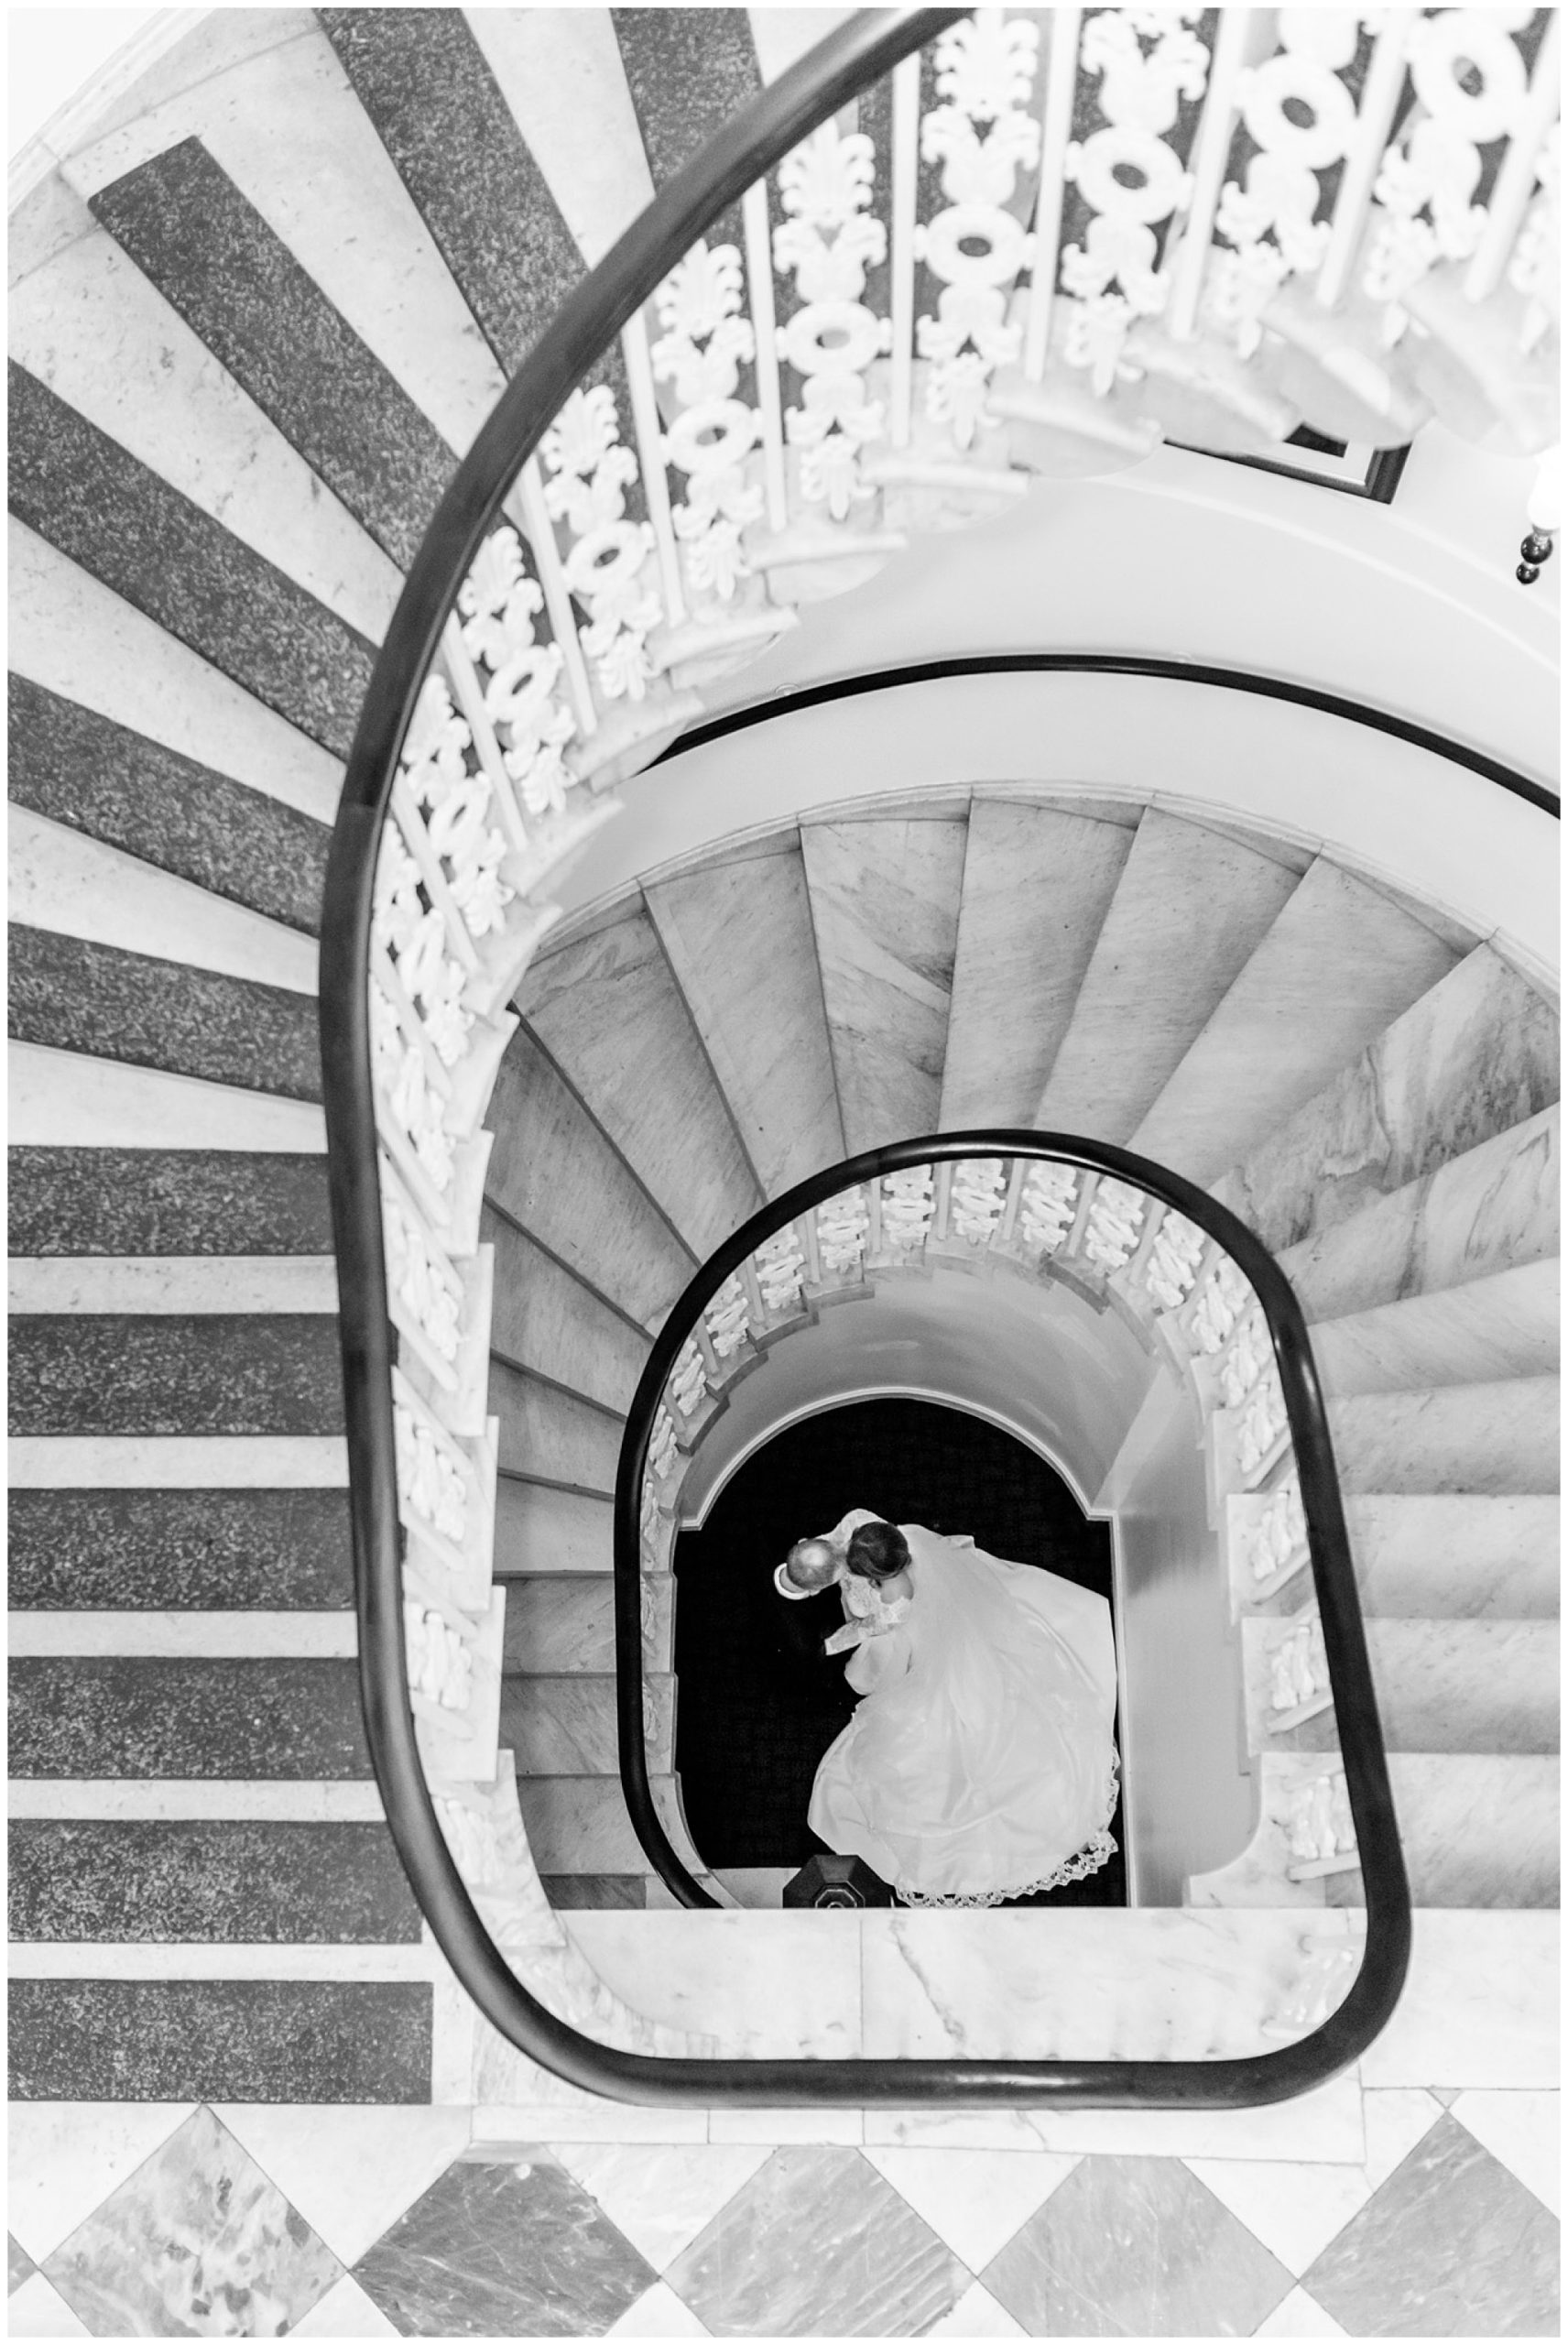 Hotel Monaco DC winter wedding, Washington DC wedding, Washington DC wedding photographer, DC hotel wedding, DC ballroom wedding, indoor wedding, winter aesthetic wedding, winter whites wedding, winter wedding aesthetic, subtle blues wedding, elegant DC wedding, classic DC wedding, Rachel E.H. Photography, black and white, bride and groom at bottom of spiral staircase